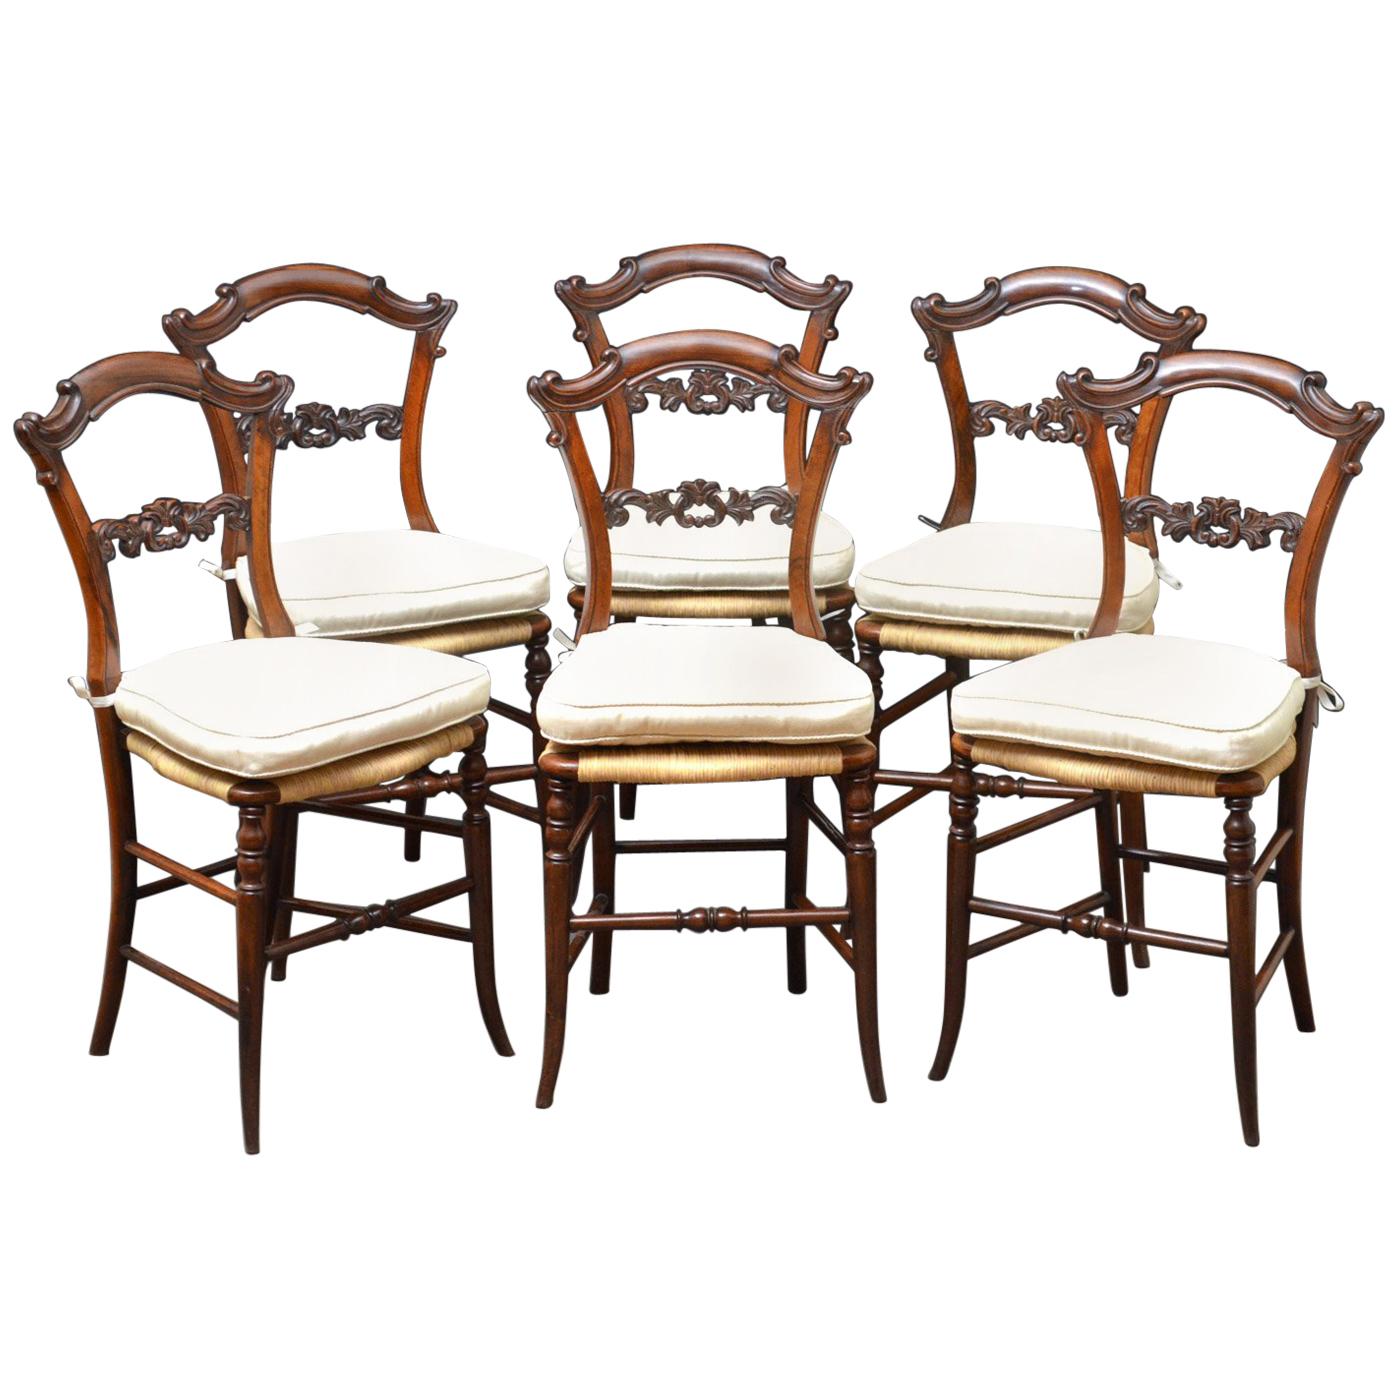 Set of Six Early Victorian Chairs in Rosewood